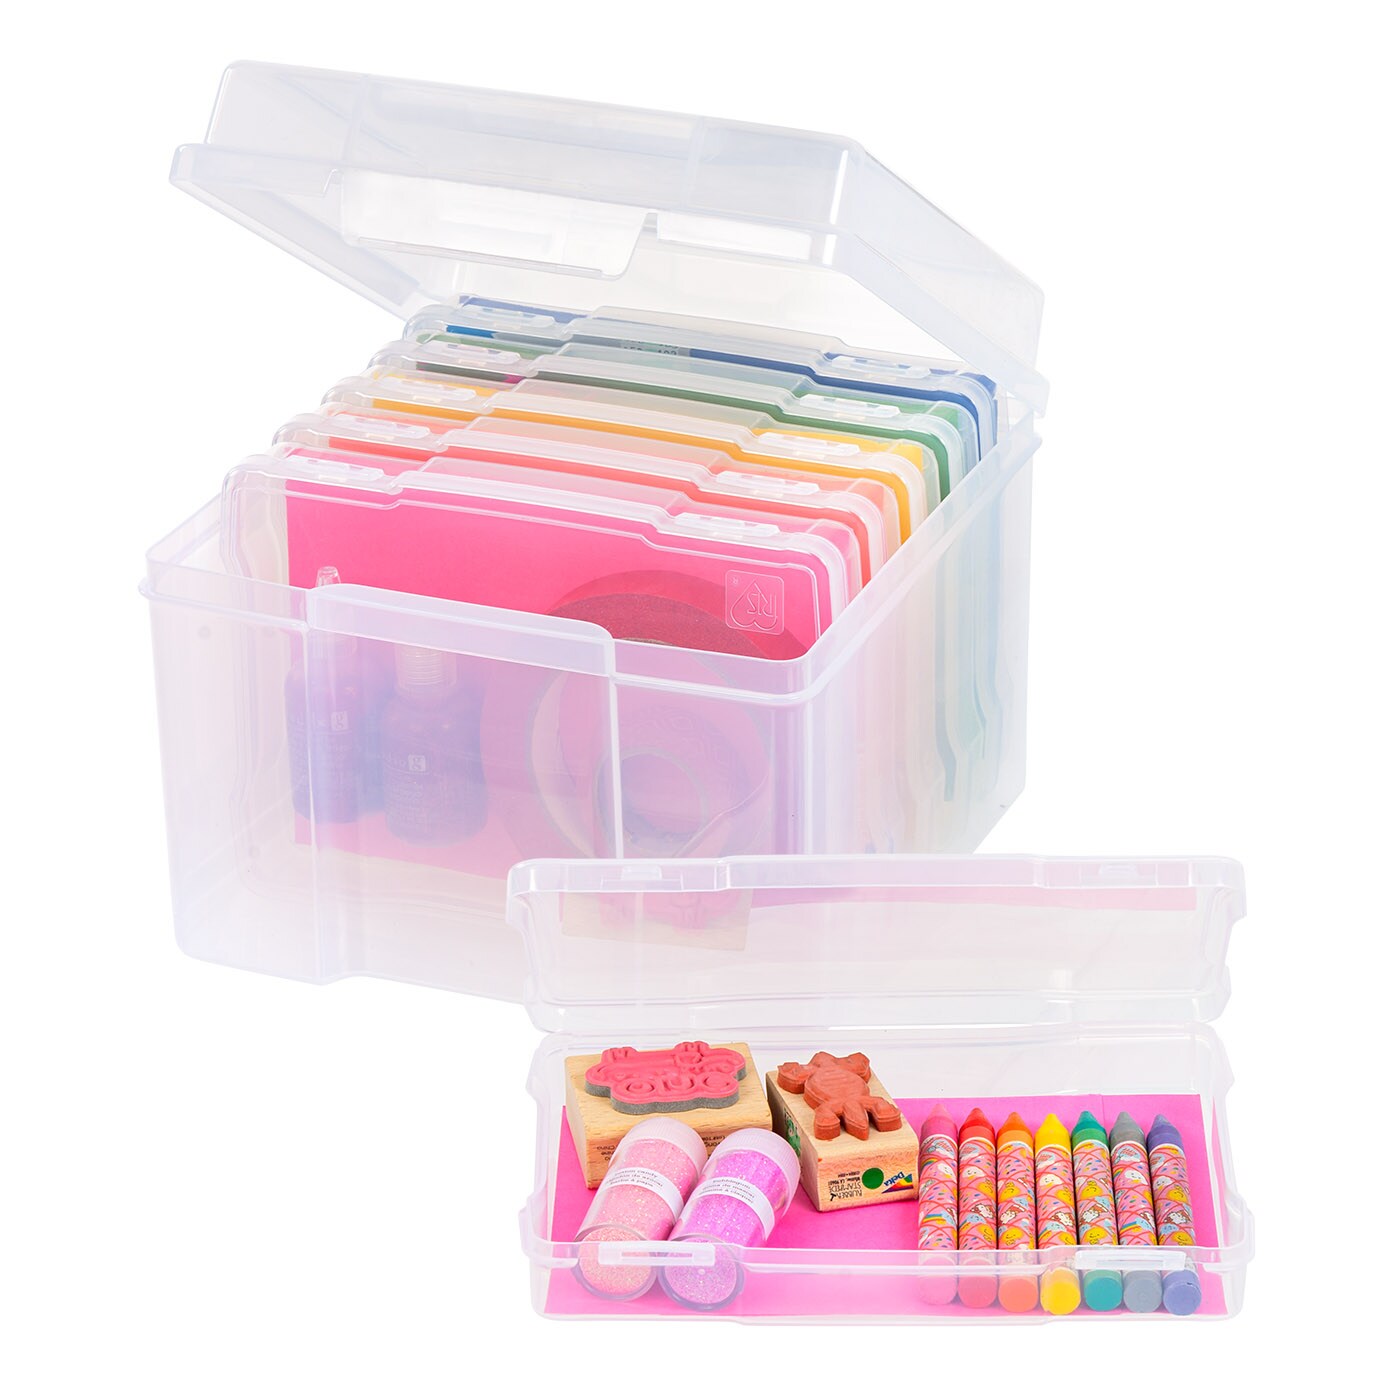 4 x 6 Inch Photo Storage Box with 6 Inner Cases (7 Pieces)